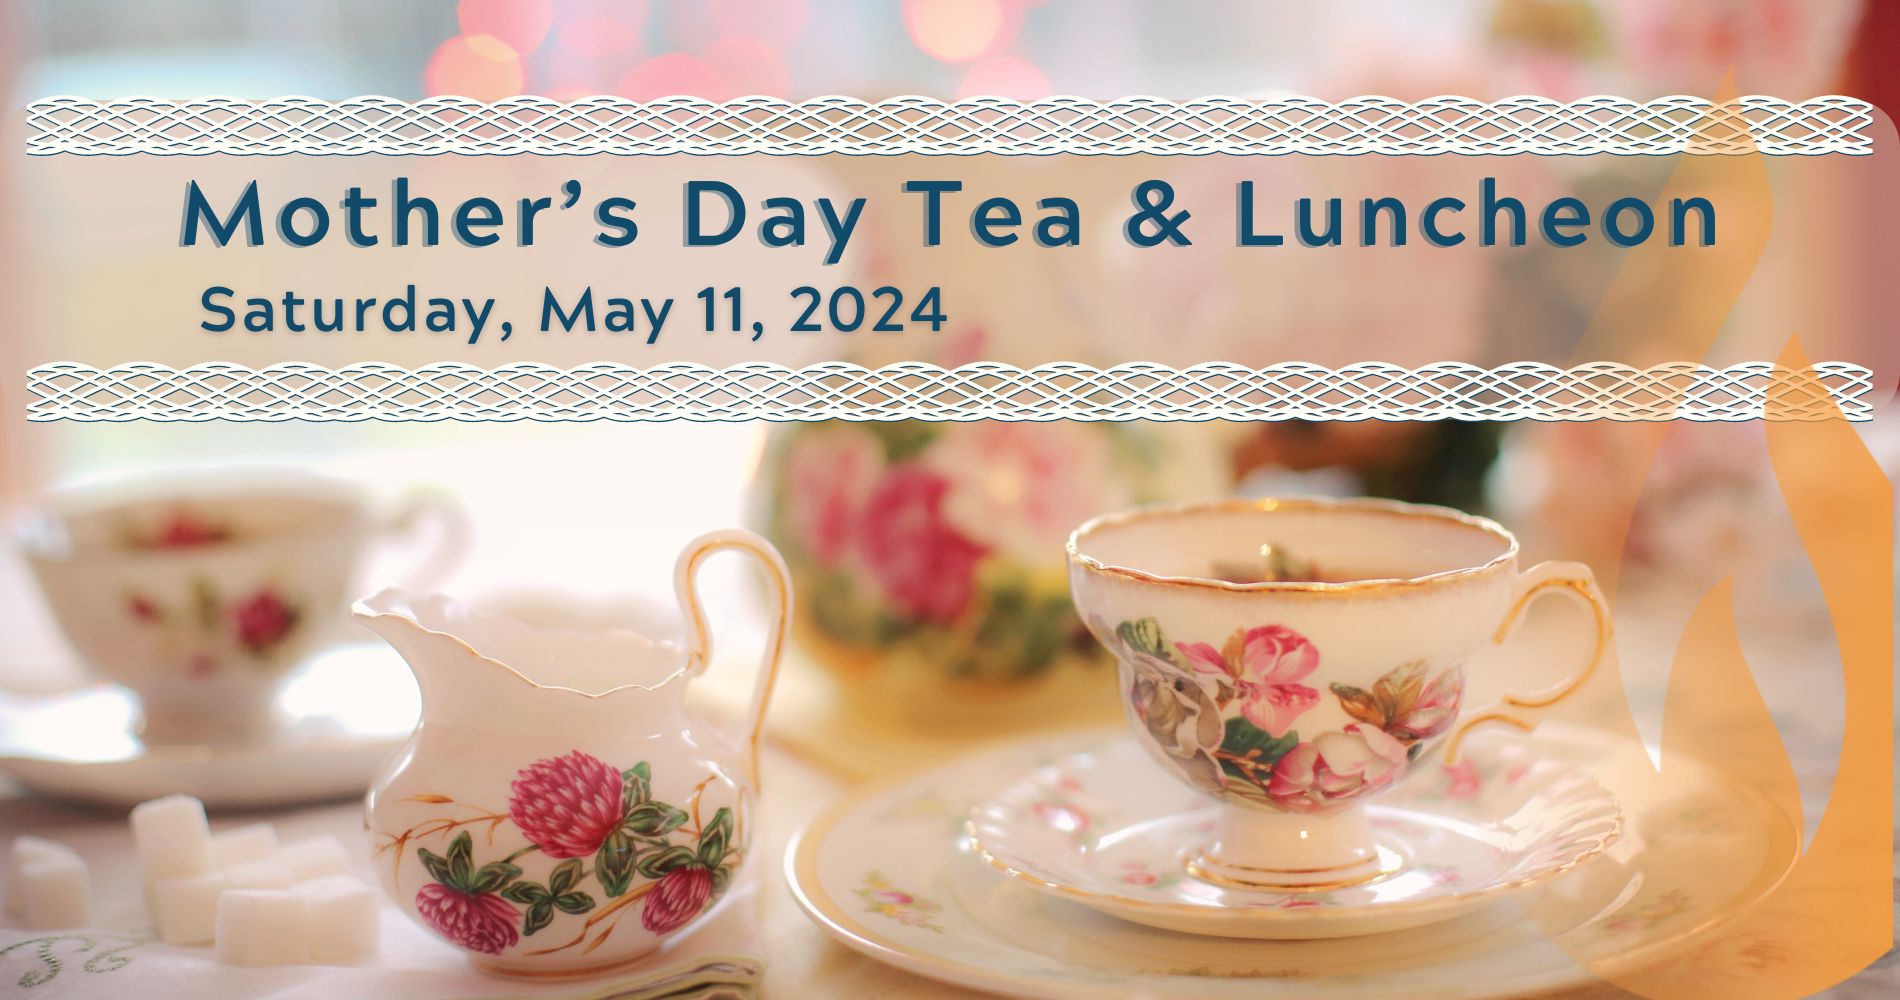 Mother's day tea and luncheon at Wildwood